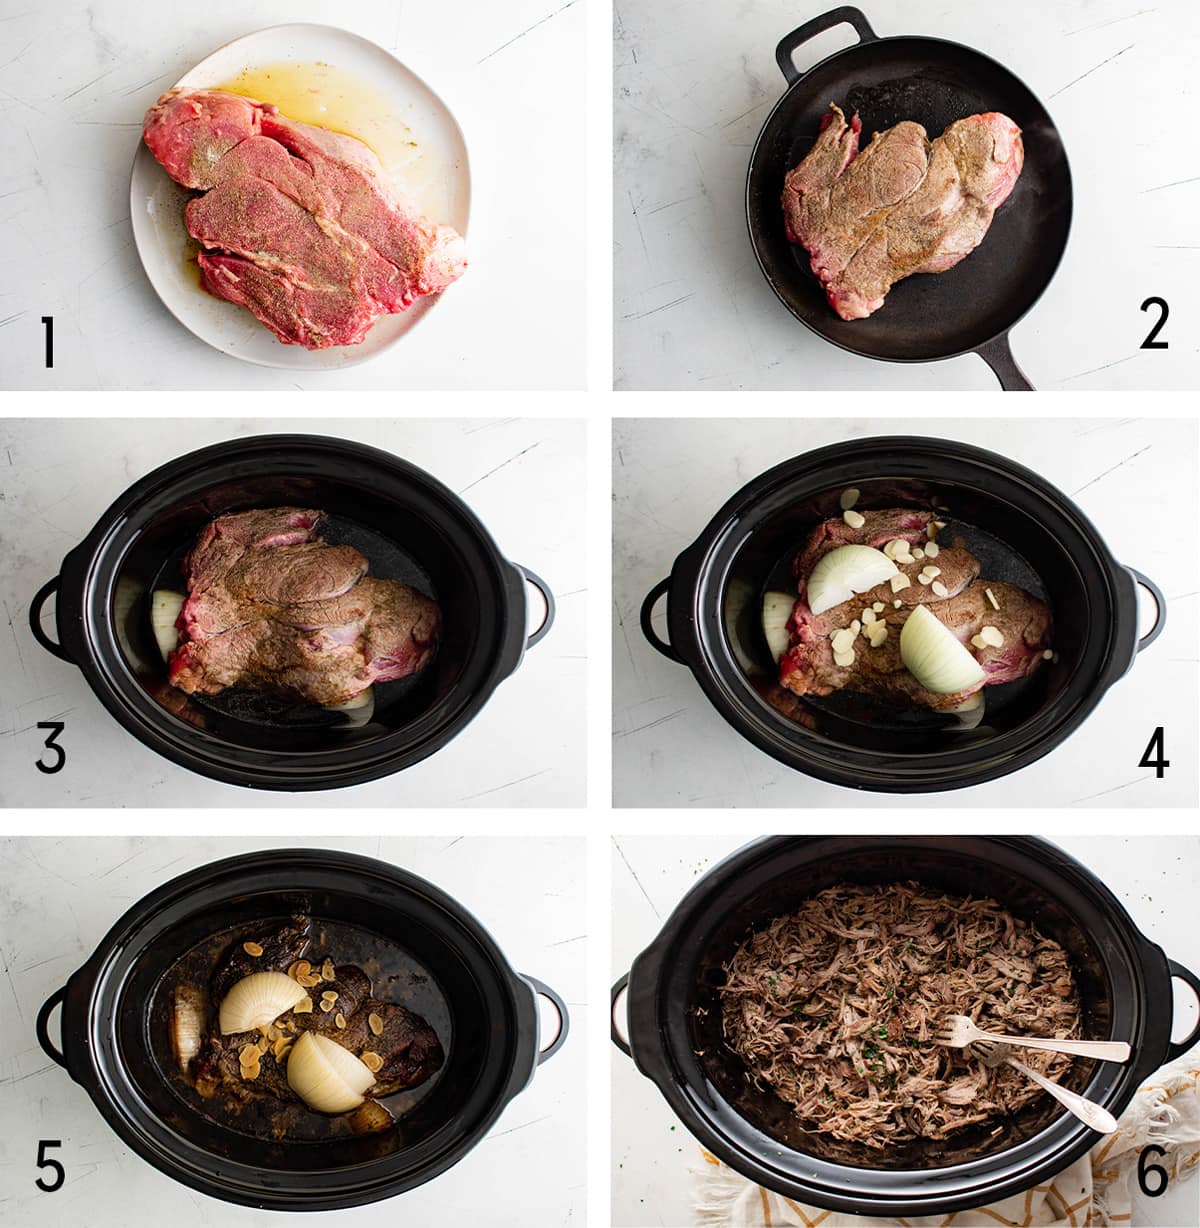 Collage of images showing how to make shredded beef in the crock pot